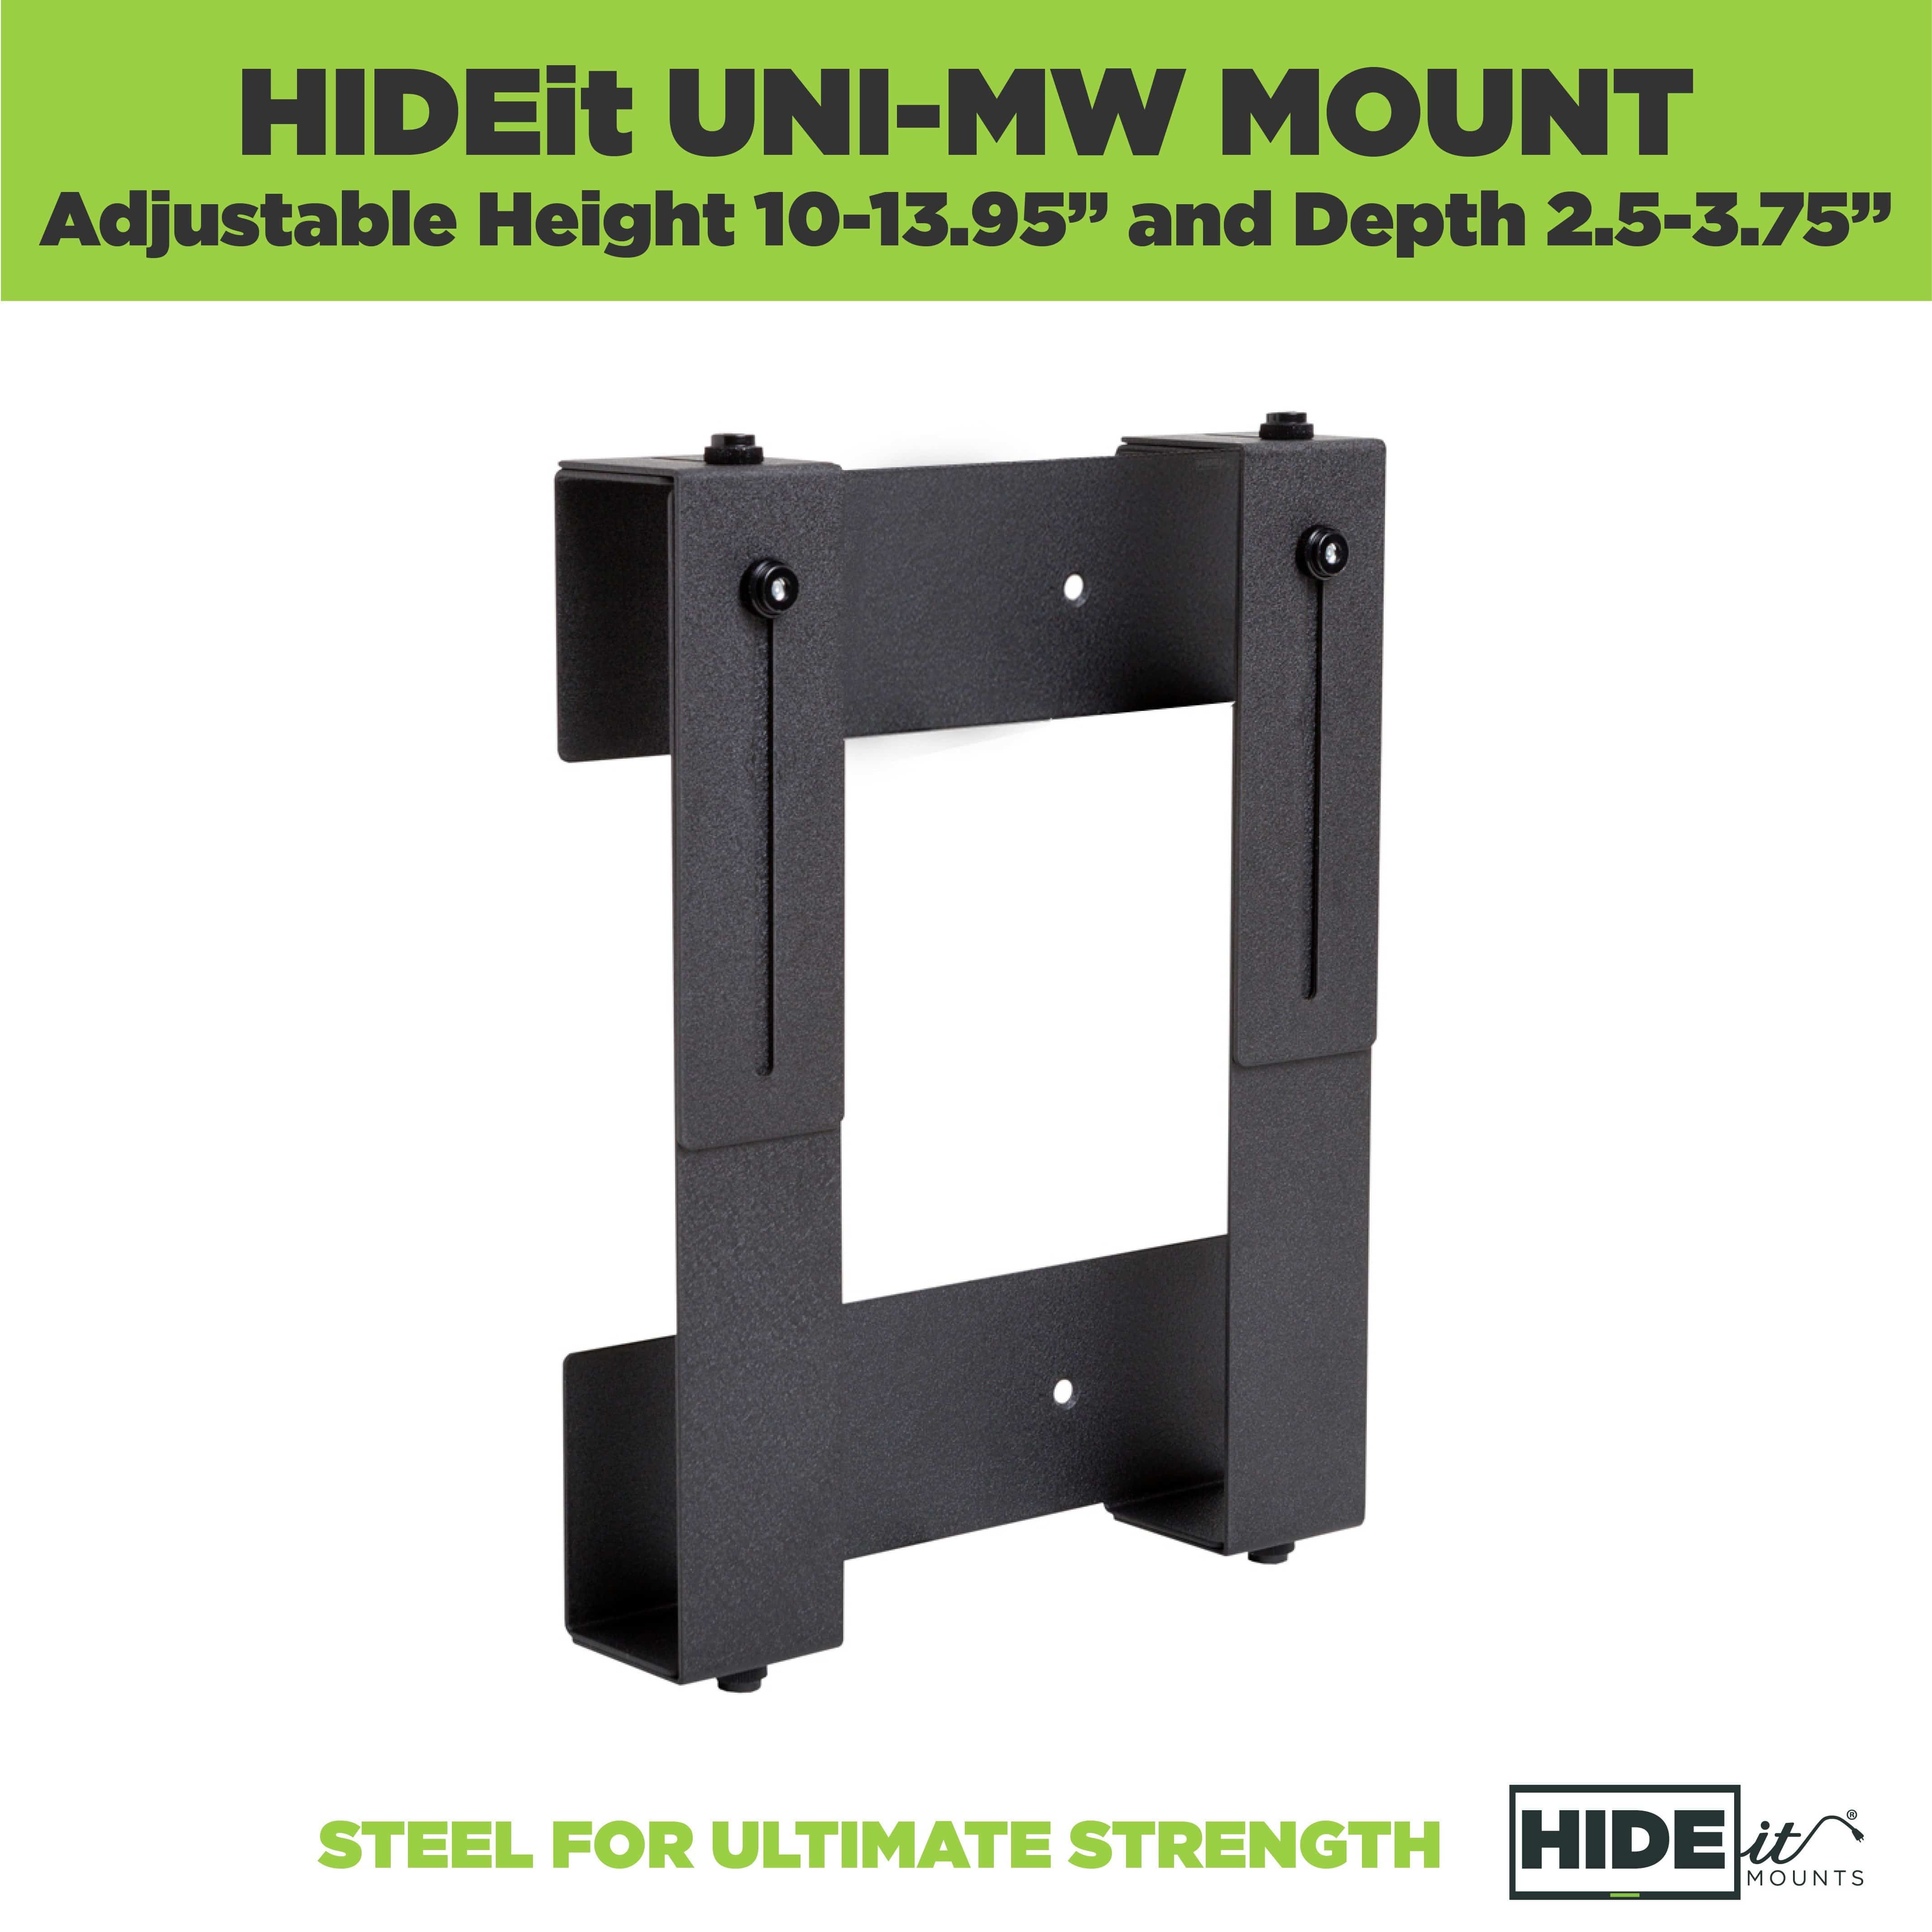 HIDEit Uni-MW Mount. Adjustable height 10-13.95” and depth 2.5-3.75" A mount for a cable box